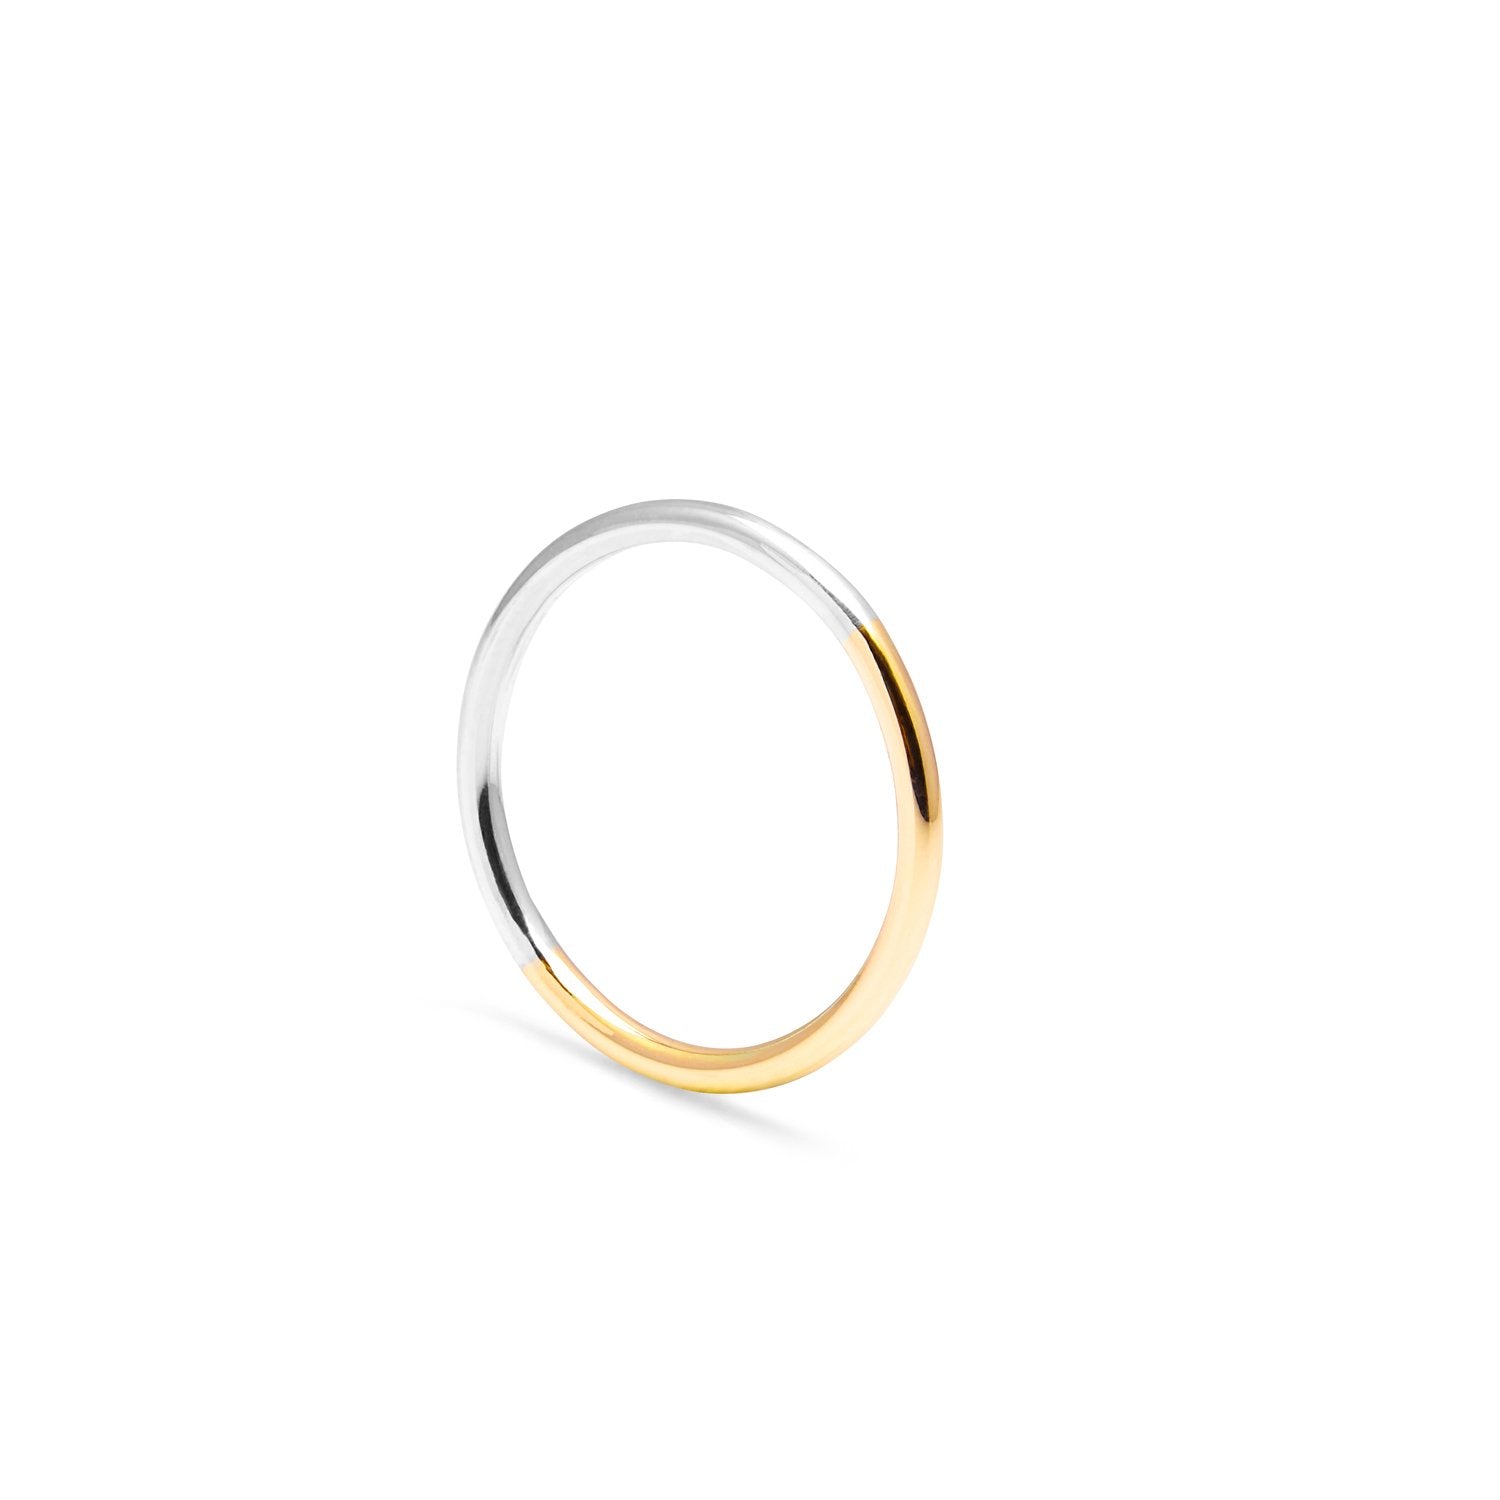 Two-tone Round Ring - 9k Yellow Gold & Silver - Myia Bonner Jewellery